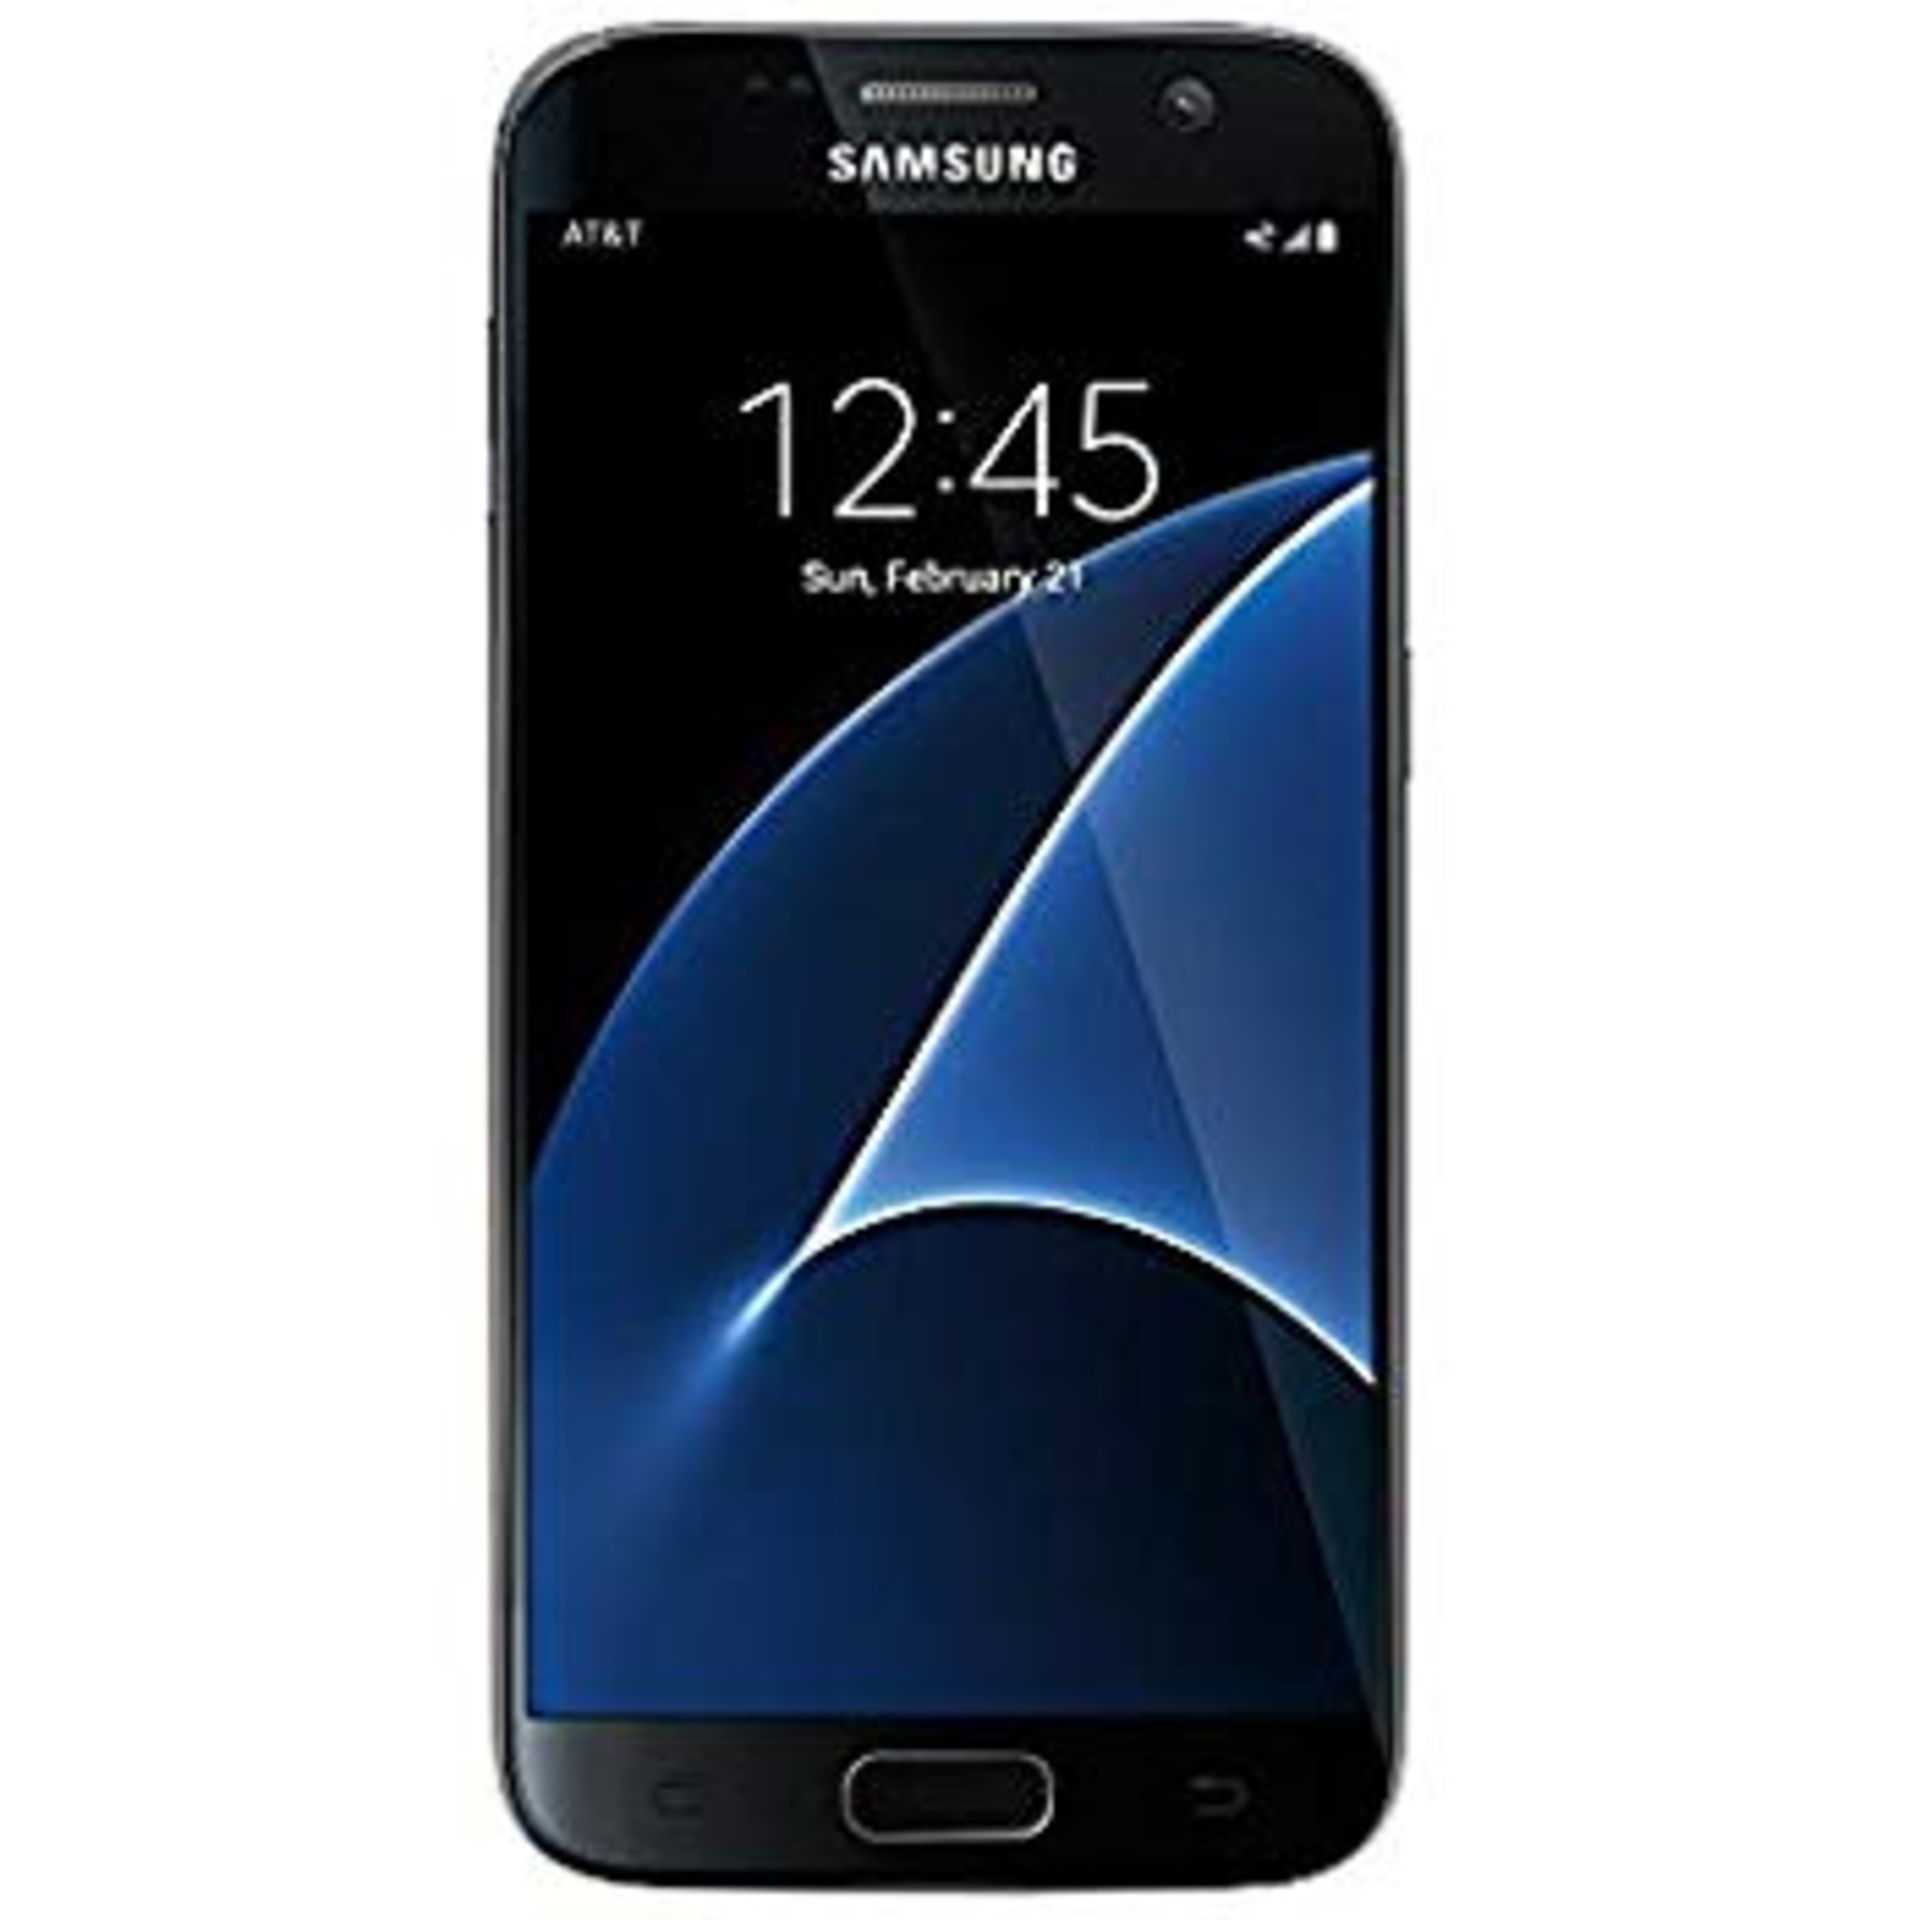 Grade A Samsung S7 ( G930A/T/V/P ) Colours May Vary Item available from approx 27th February